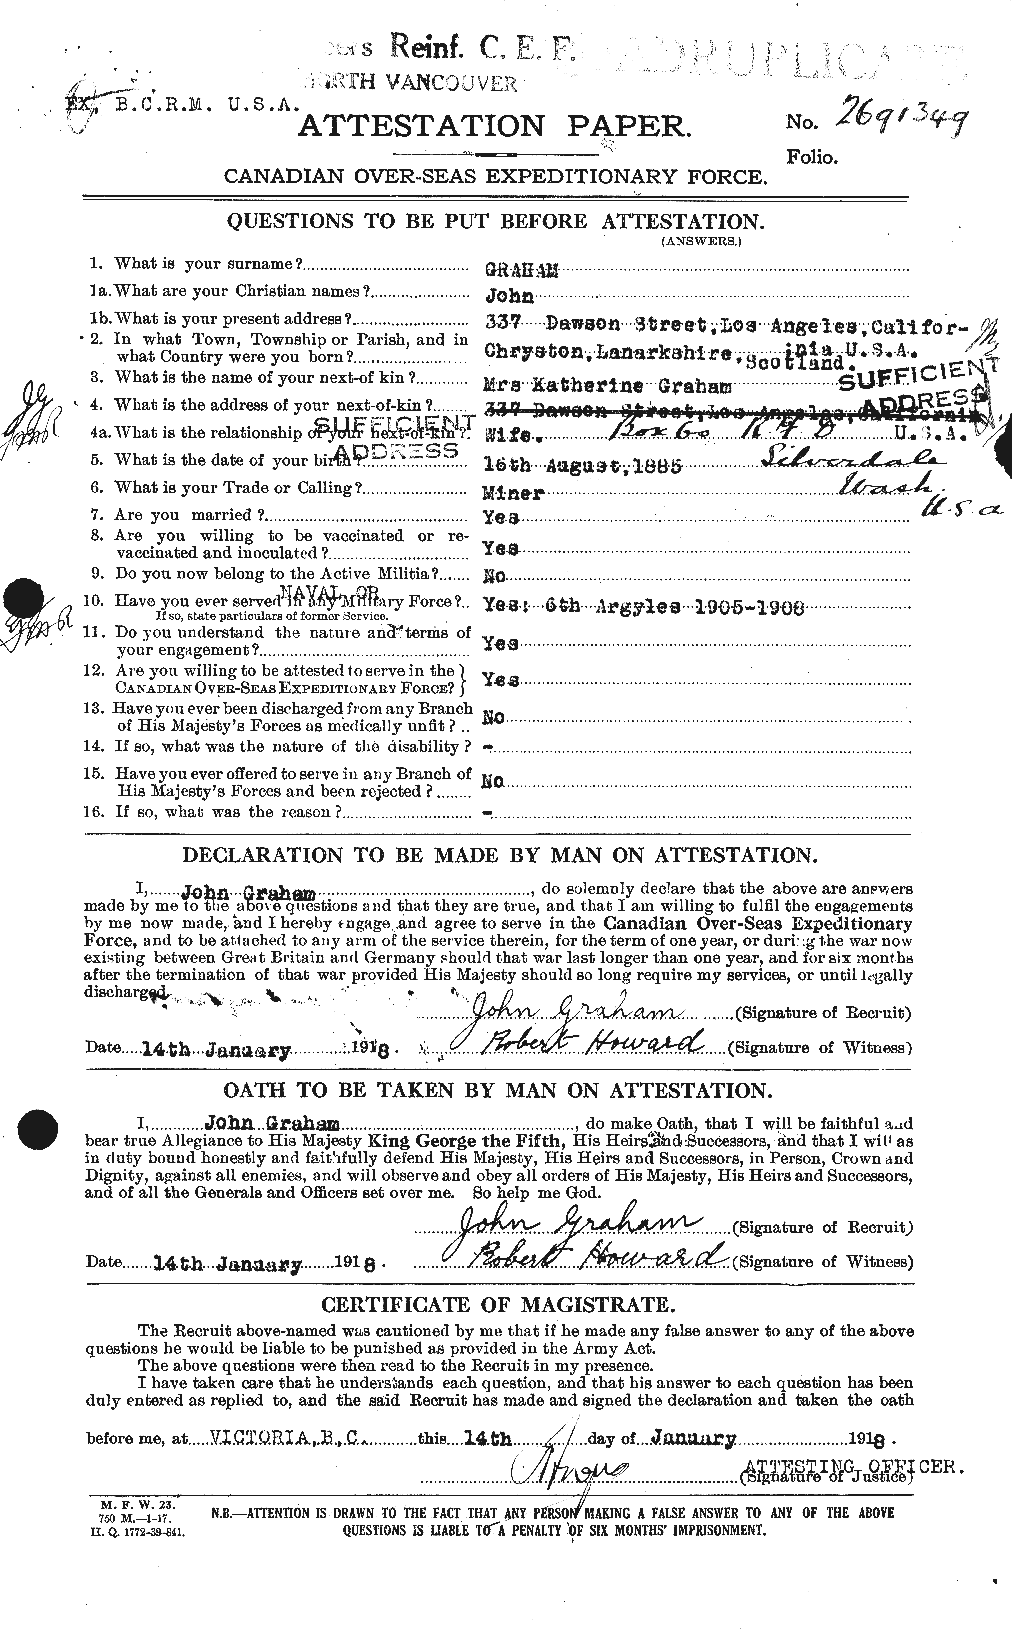 Personnel Records of the First World War - CEF 359128a